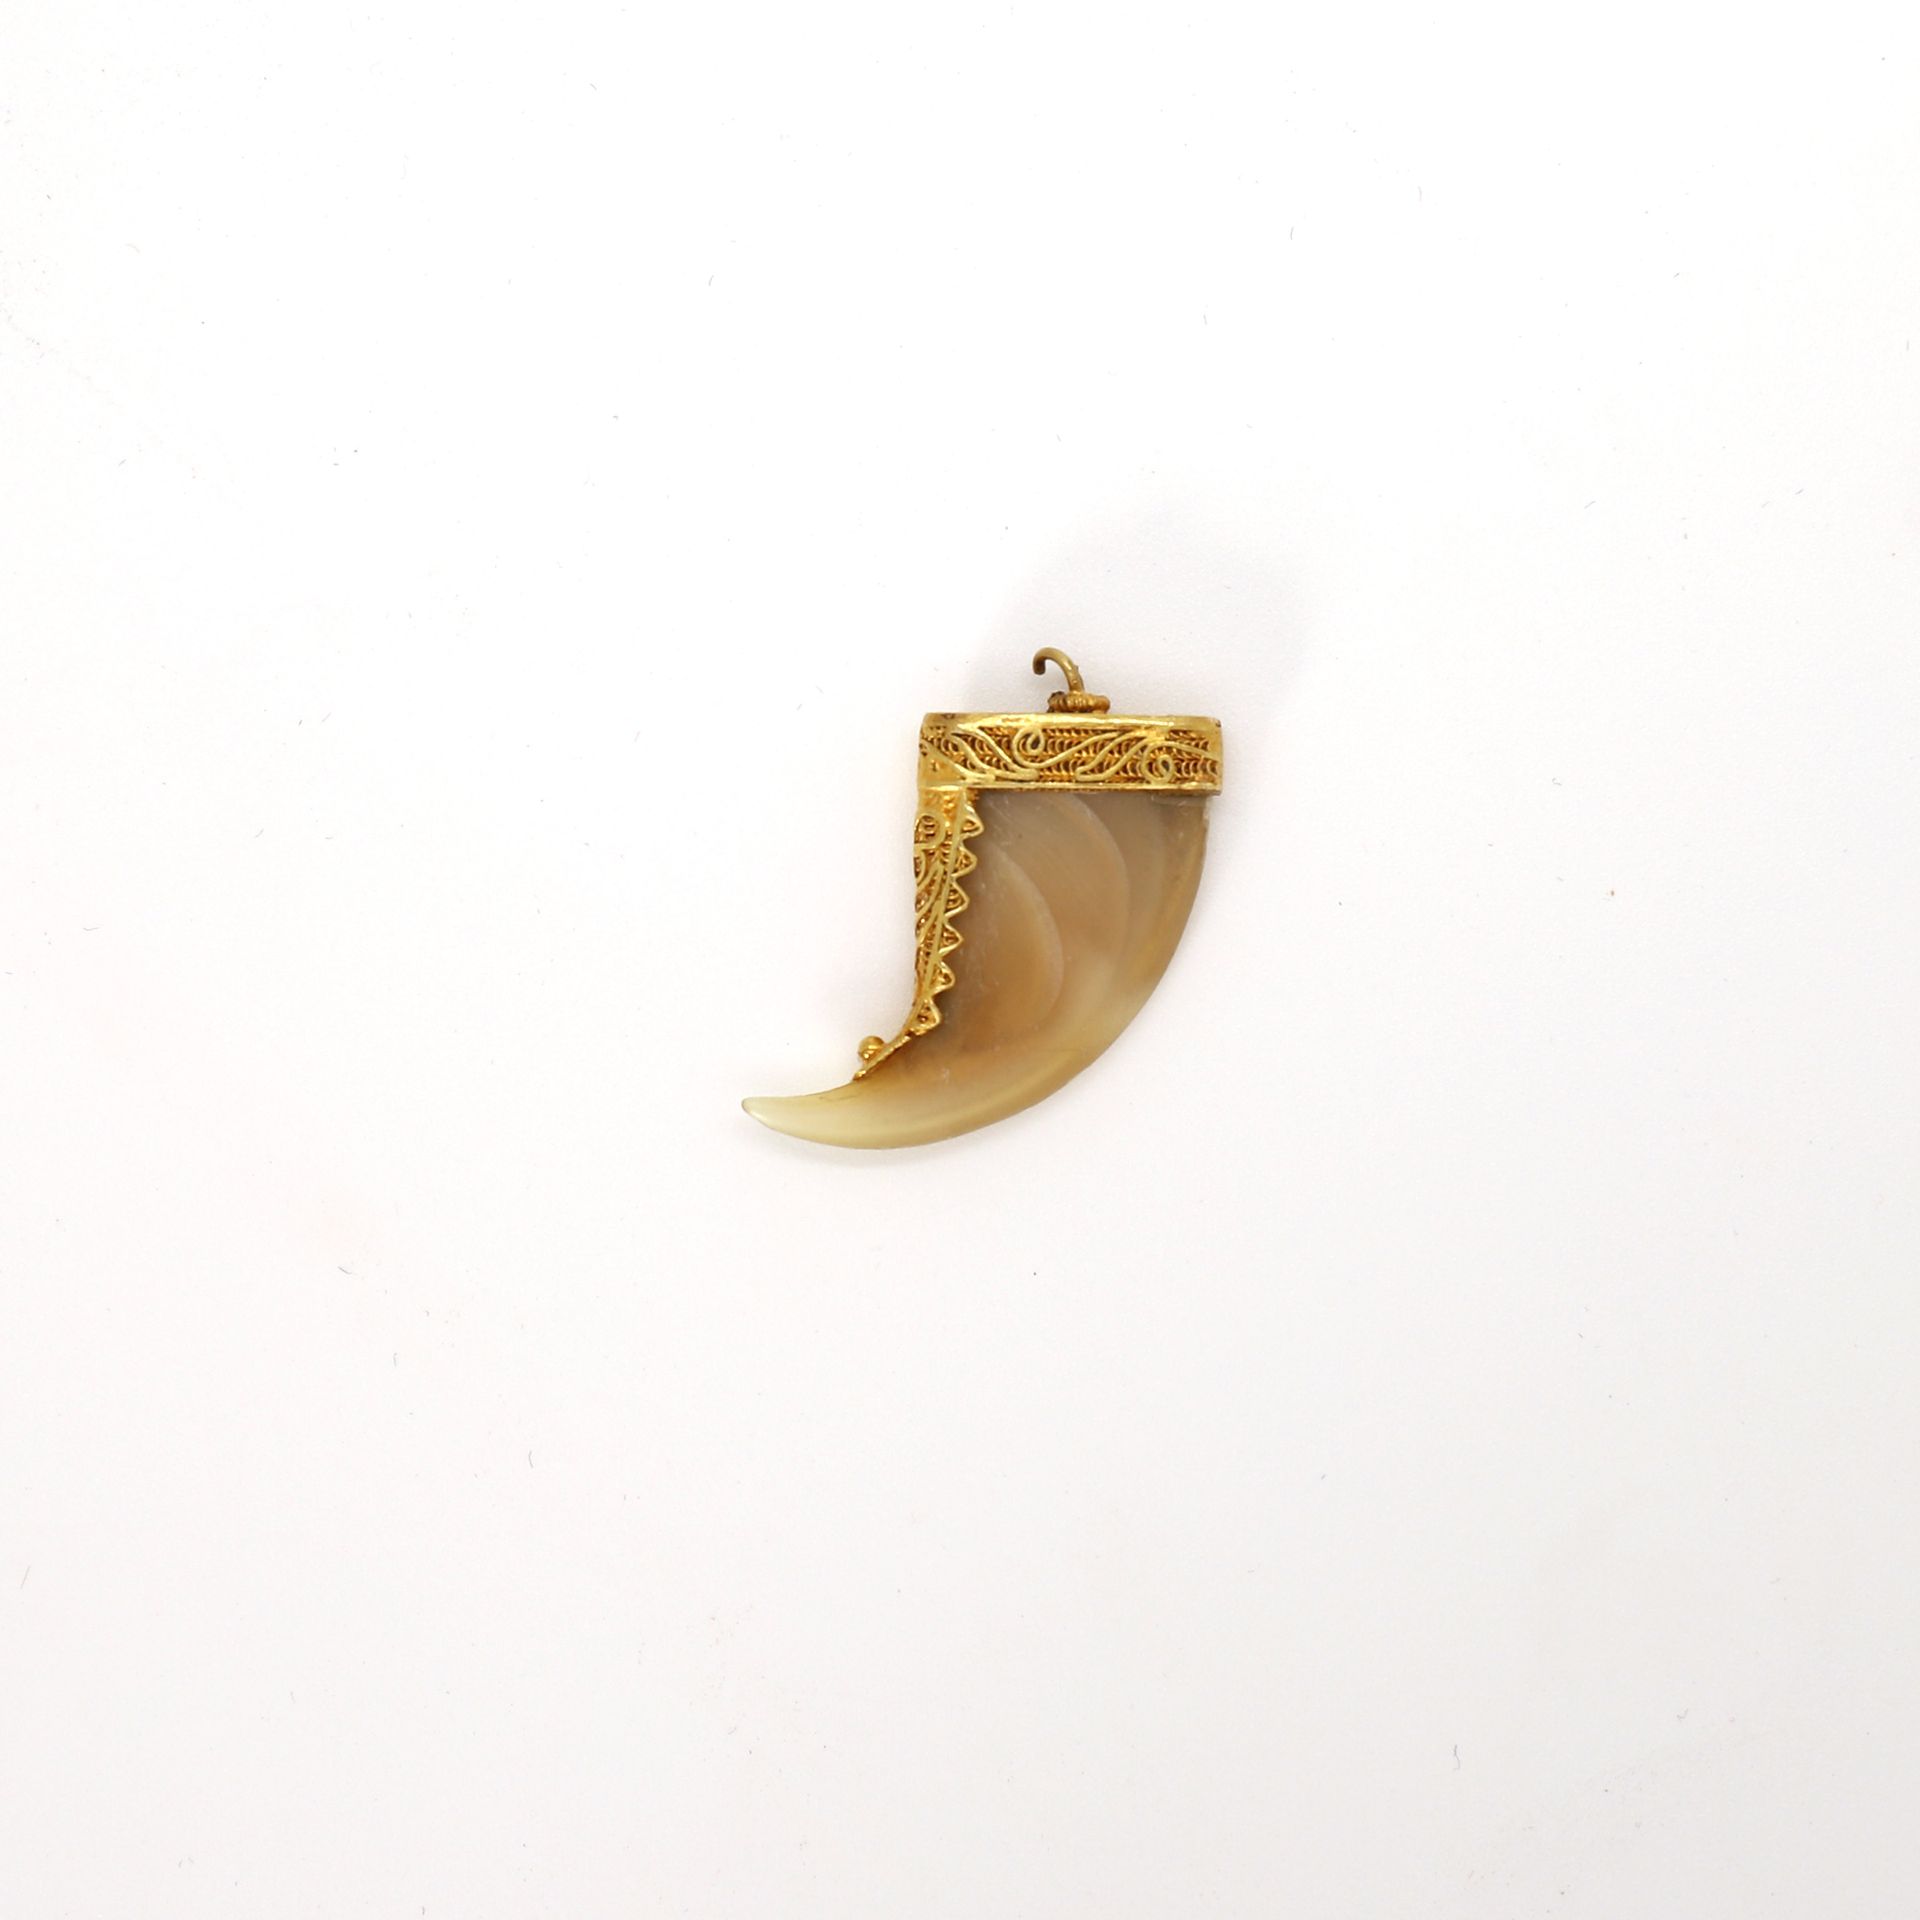 Null GOLD AND MOTHER-OF-PEARL (?) HORN PENDANT

Pb : 1 g

Accident on the clasp